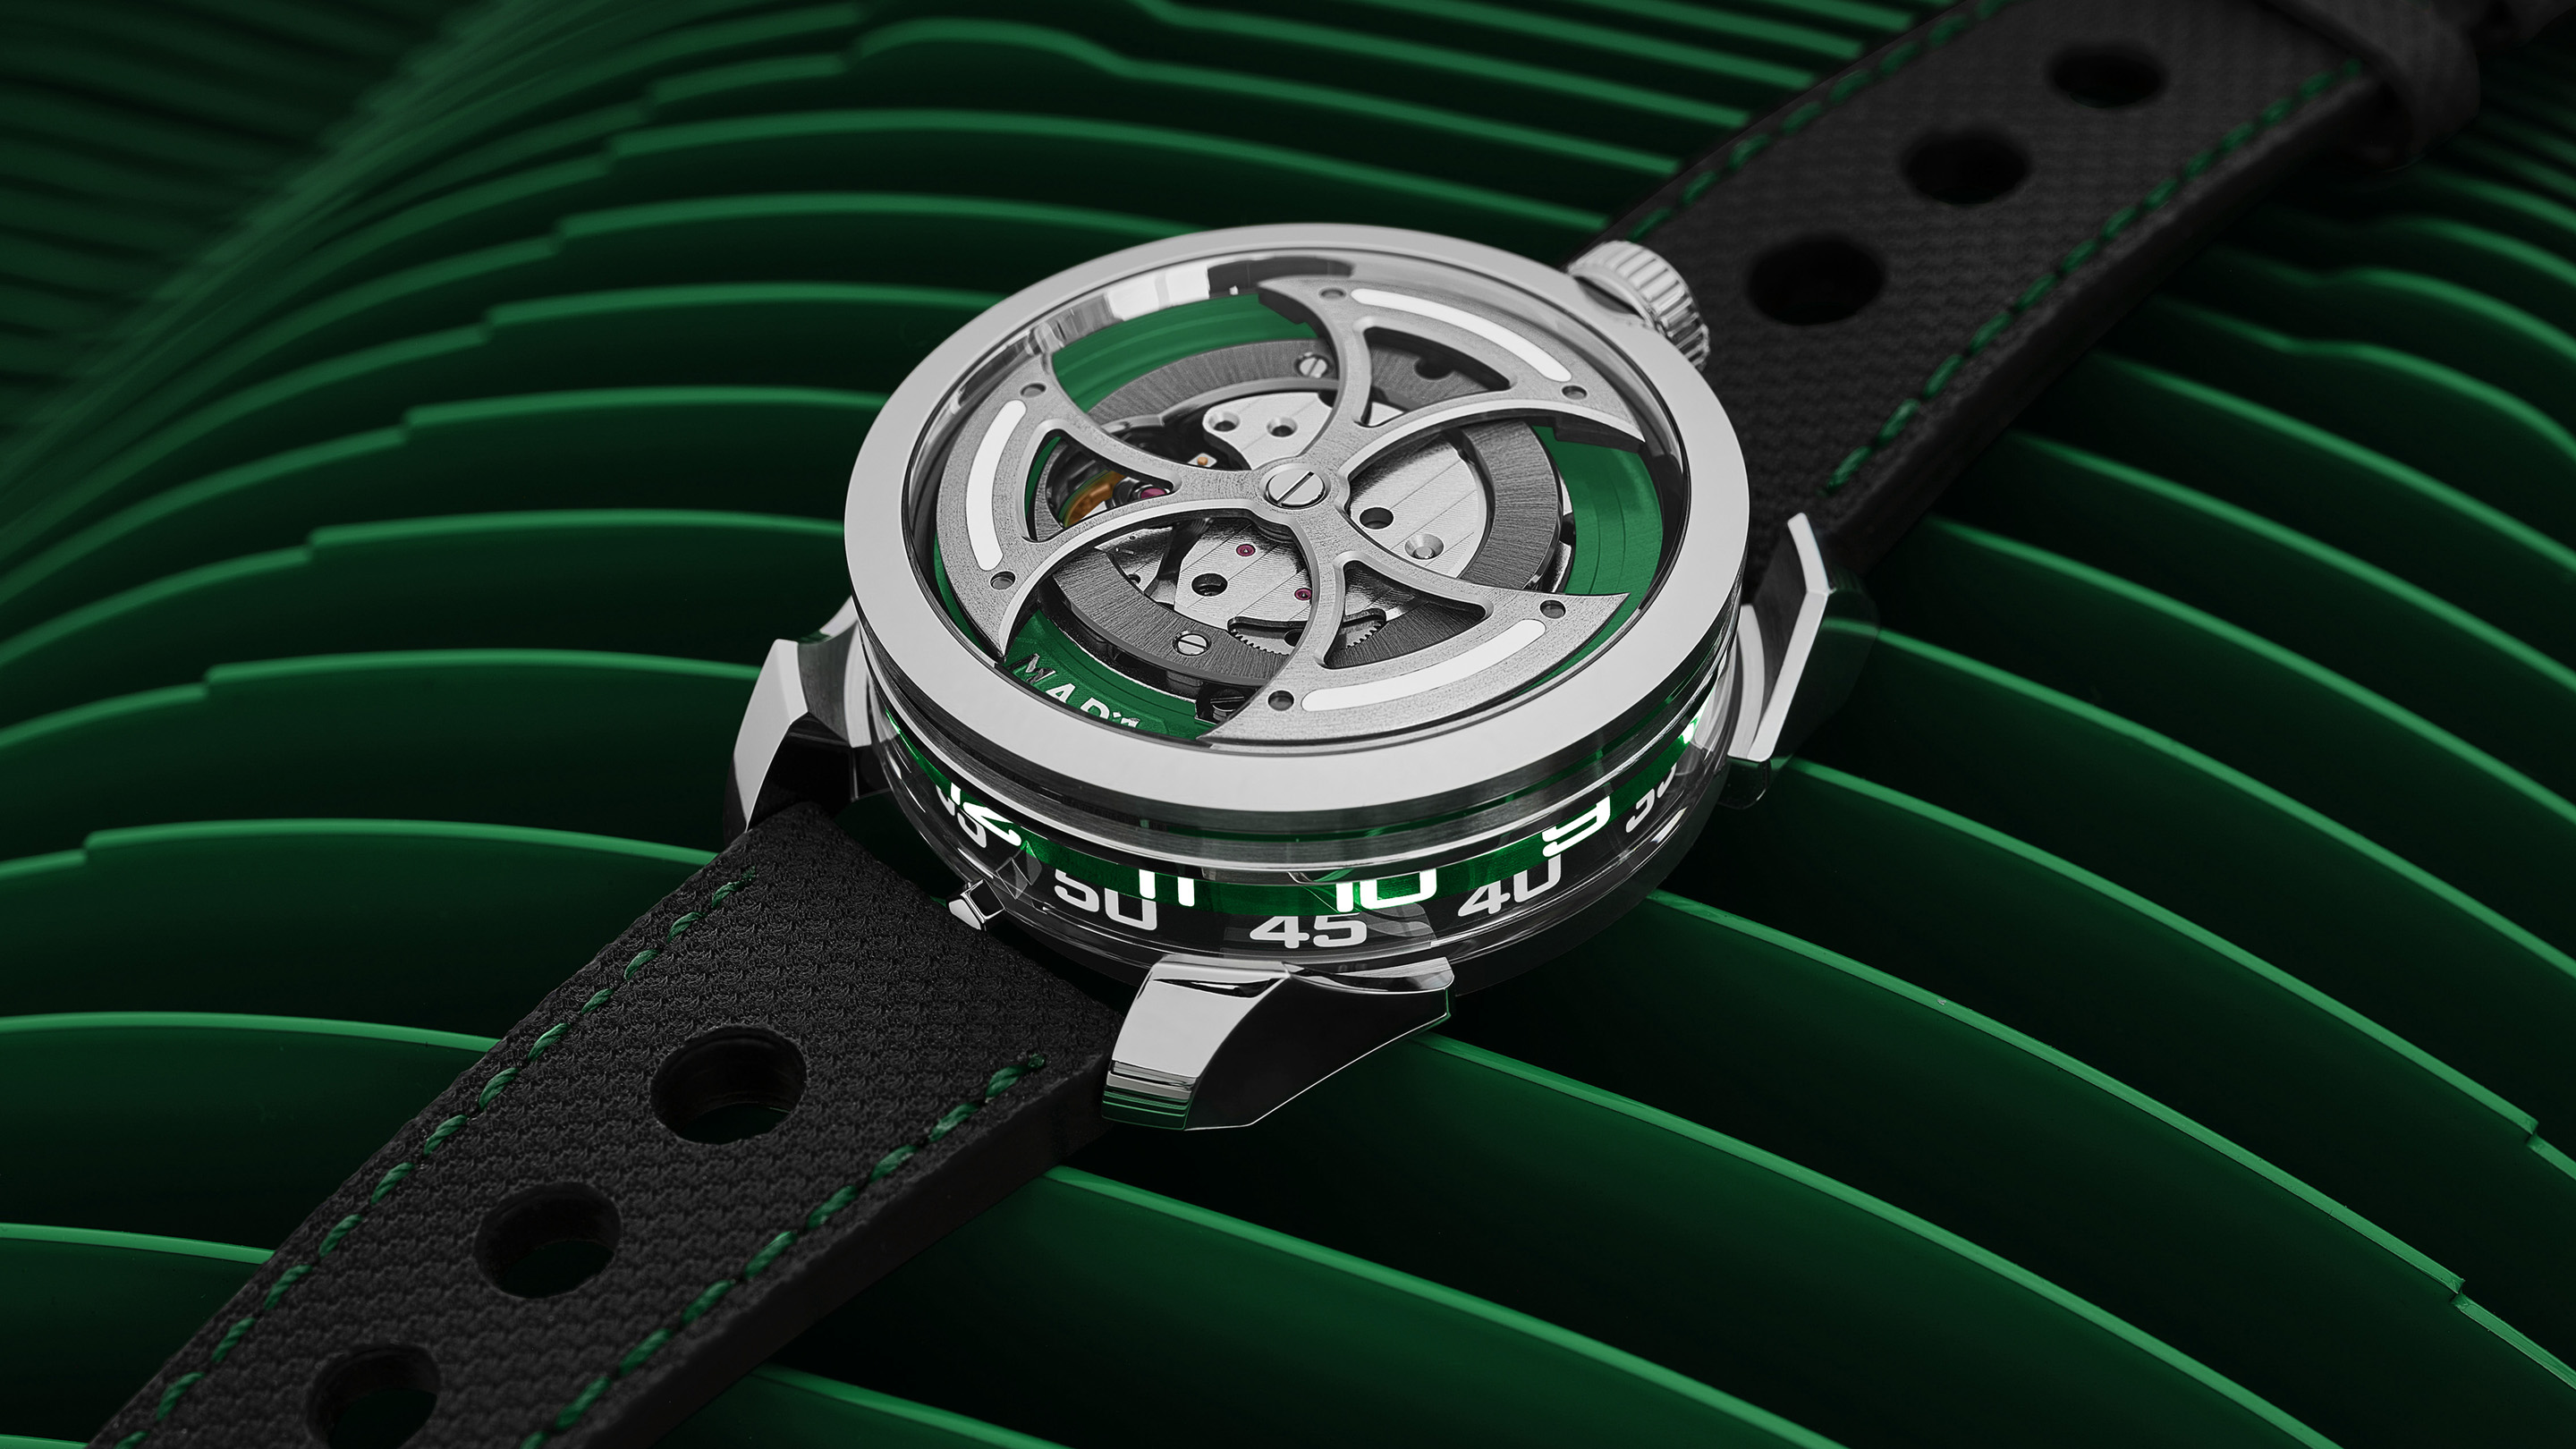 Introducing the M.A.D.1 Green from the mind of Max Büsser